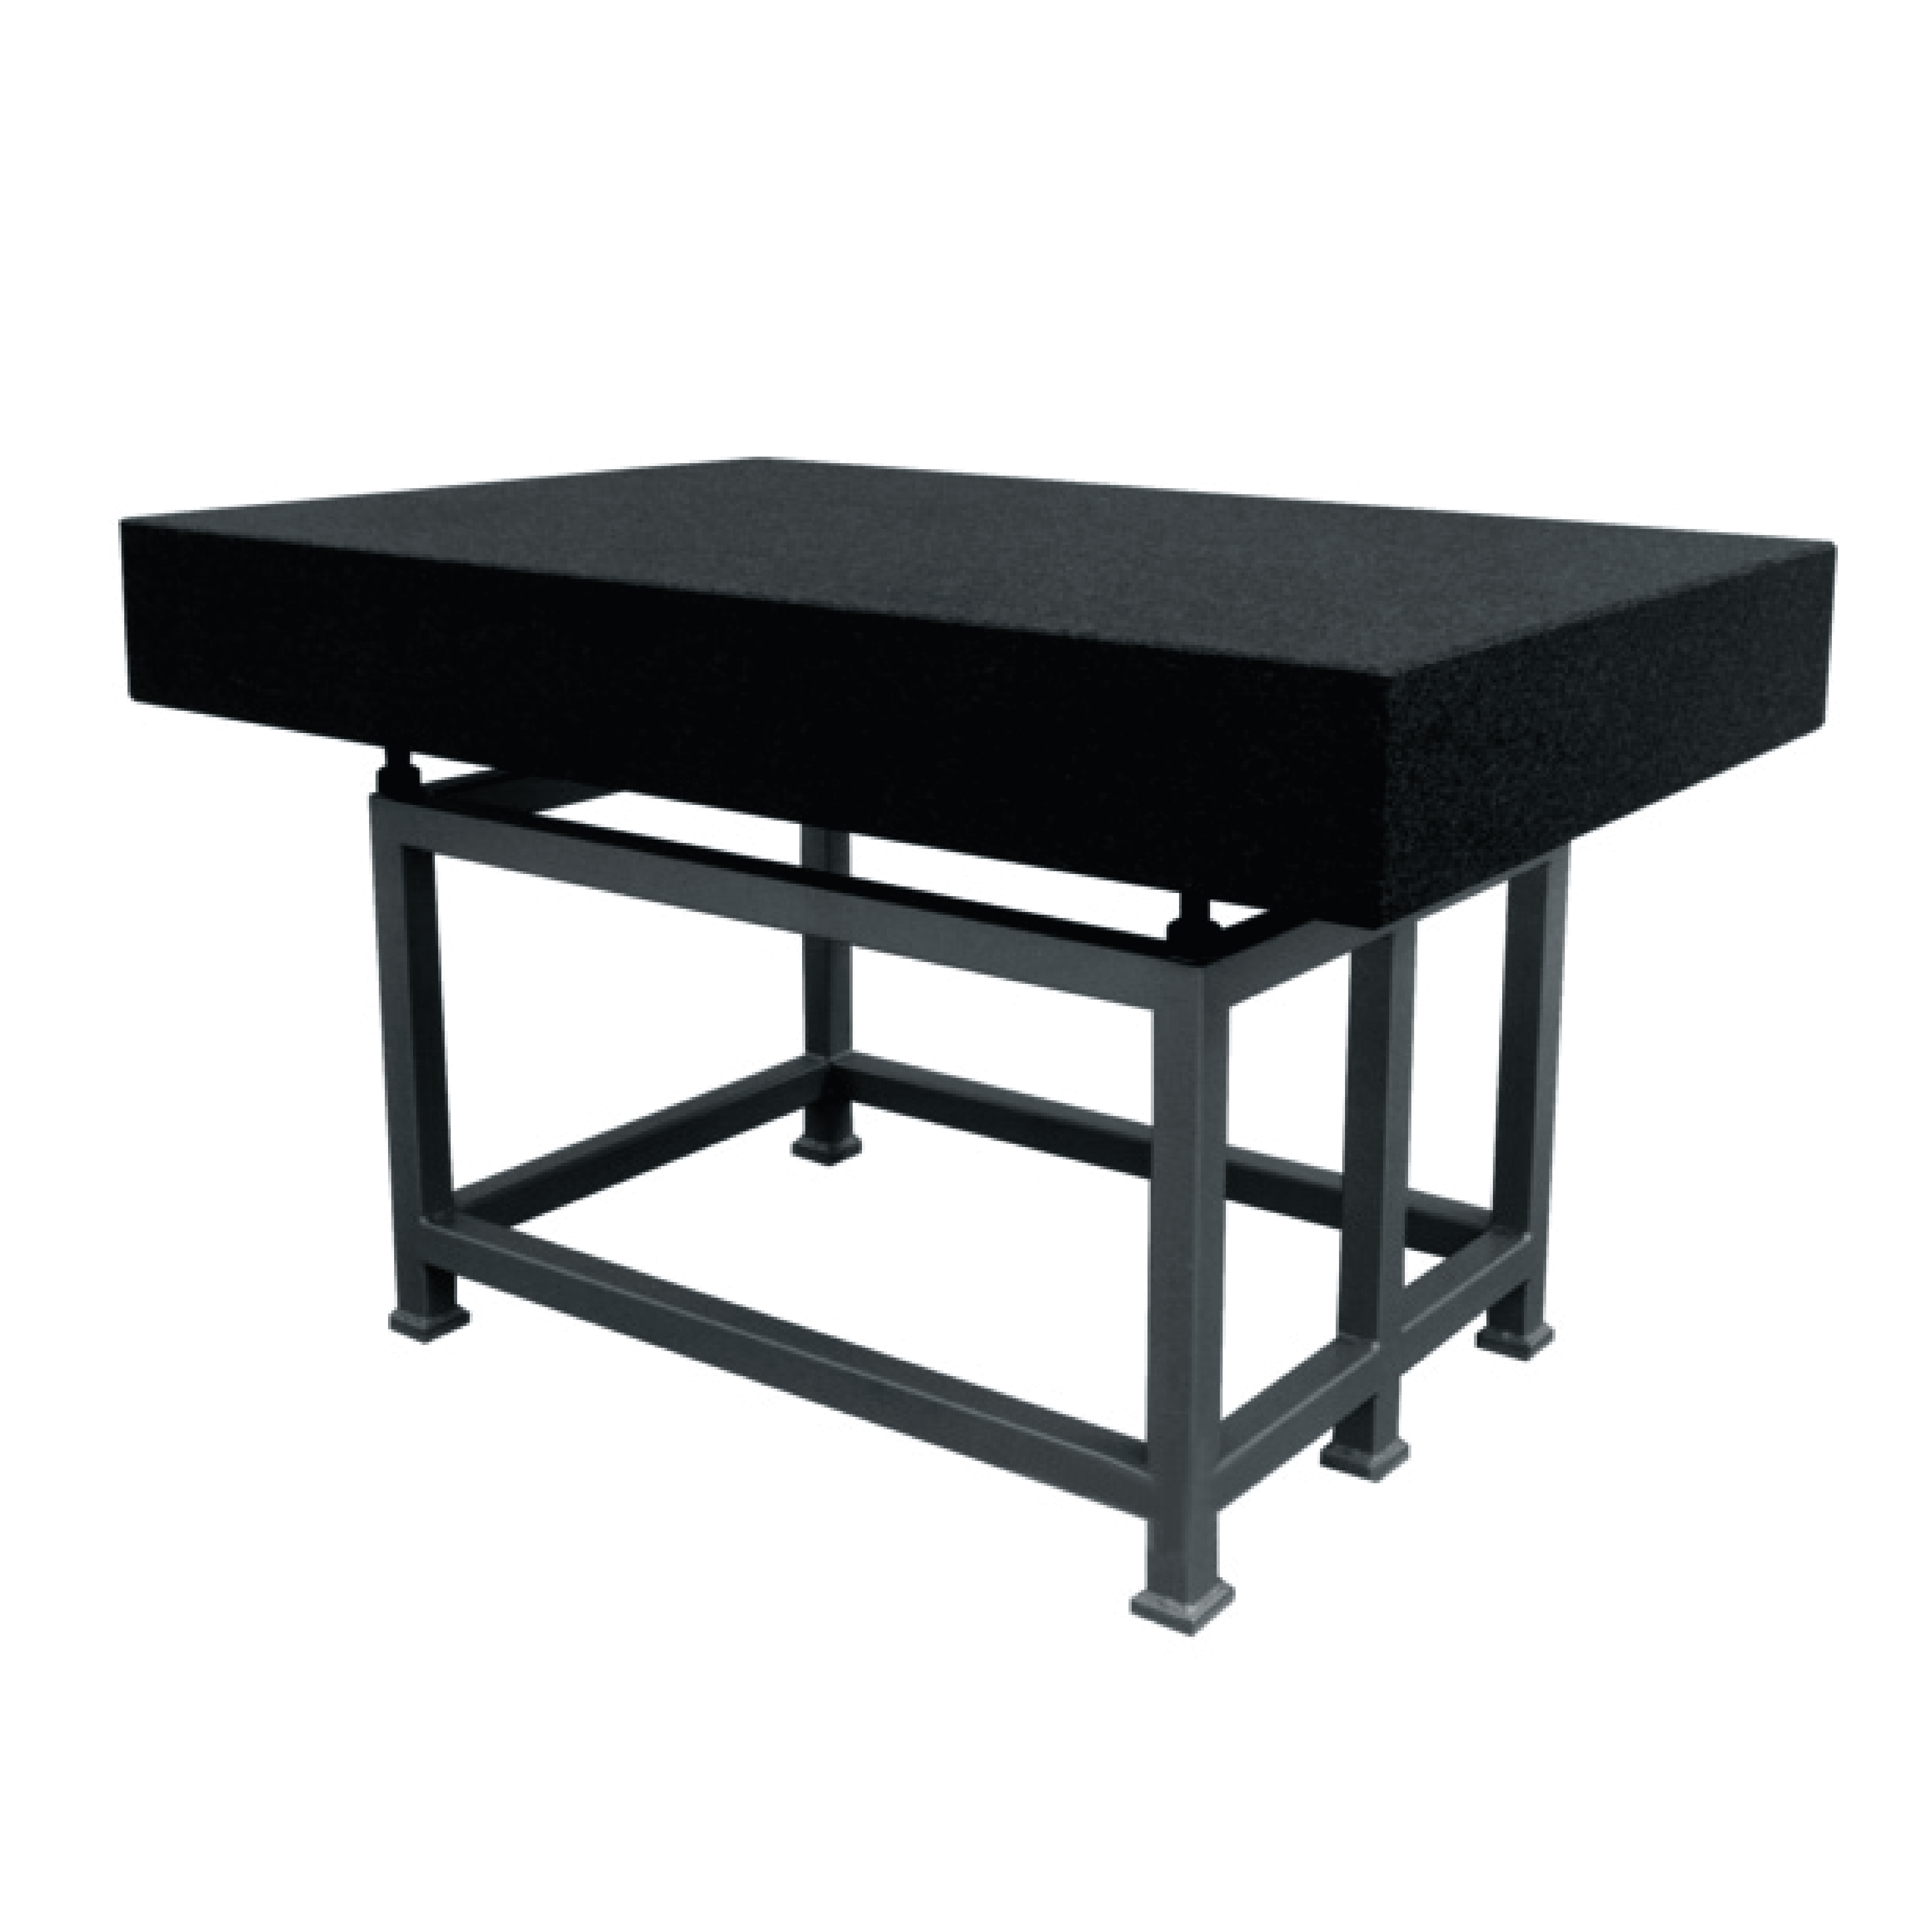 Granite surface table for all metrology